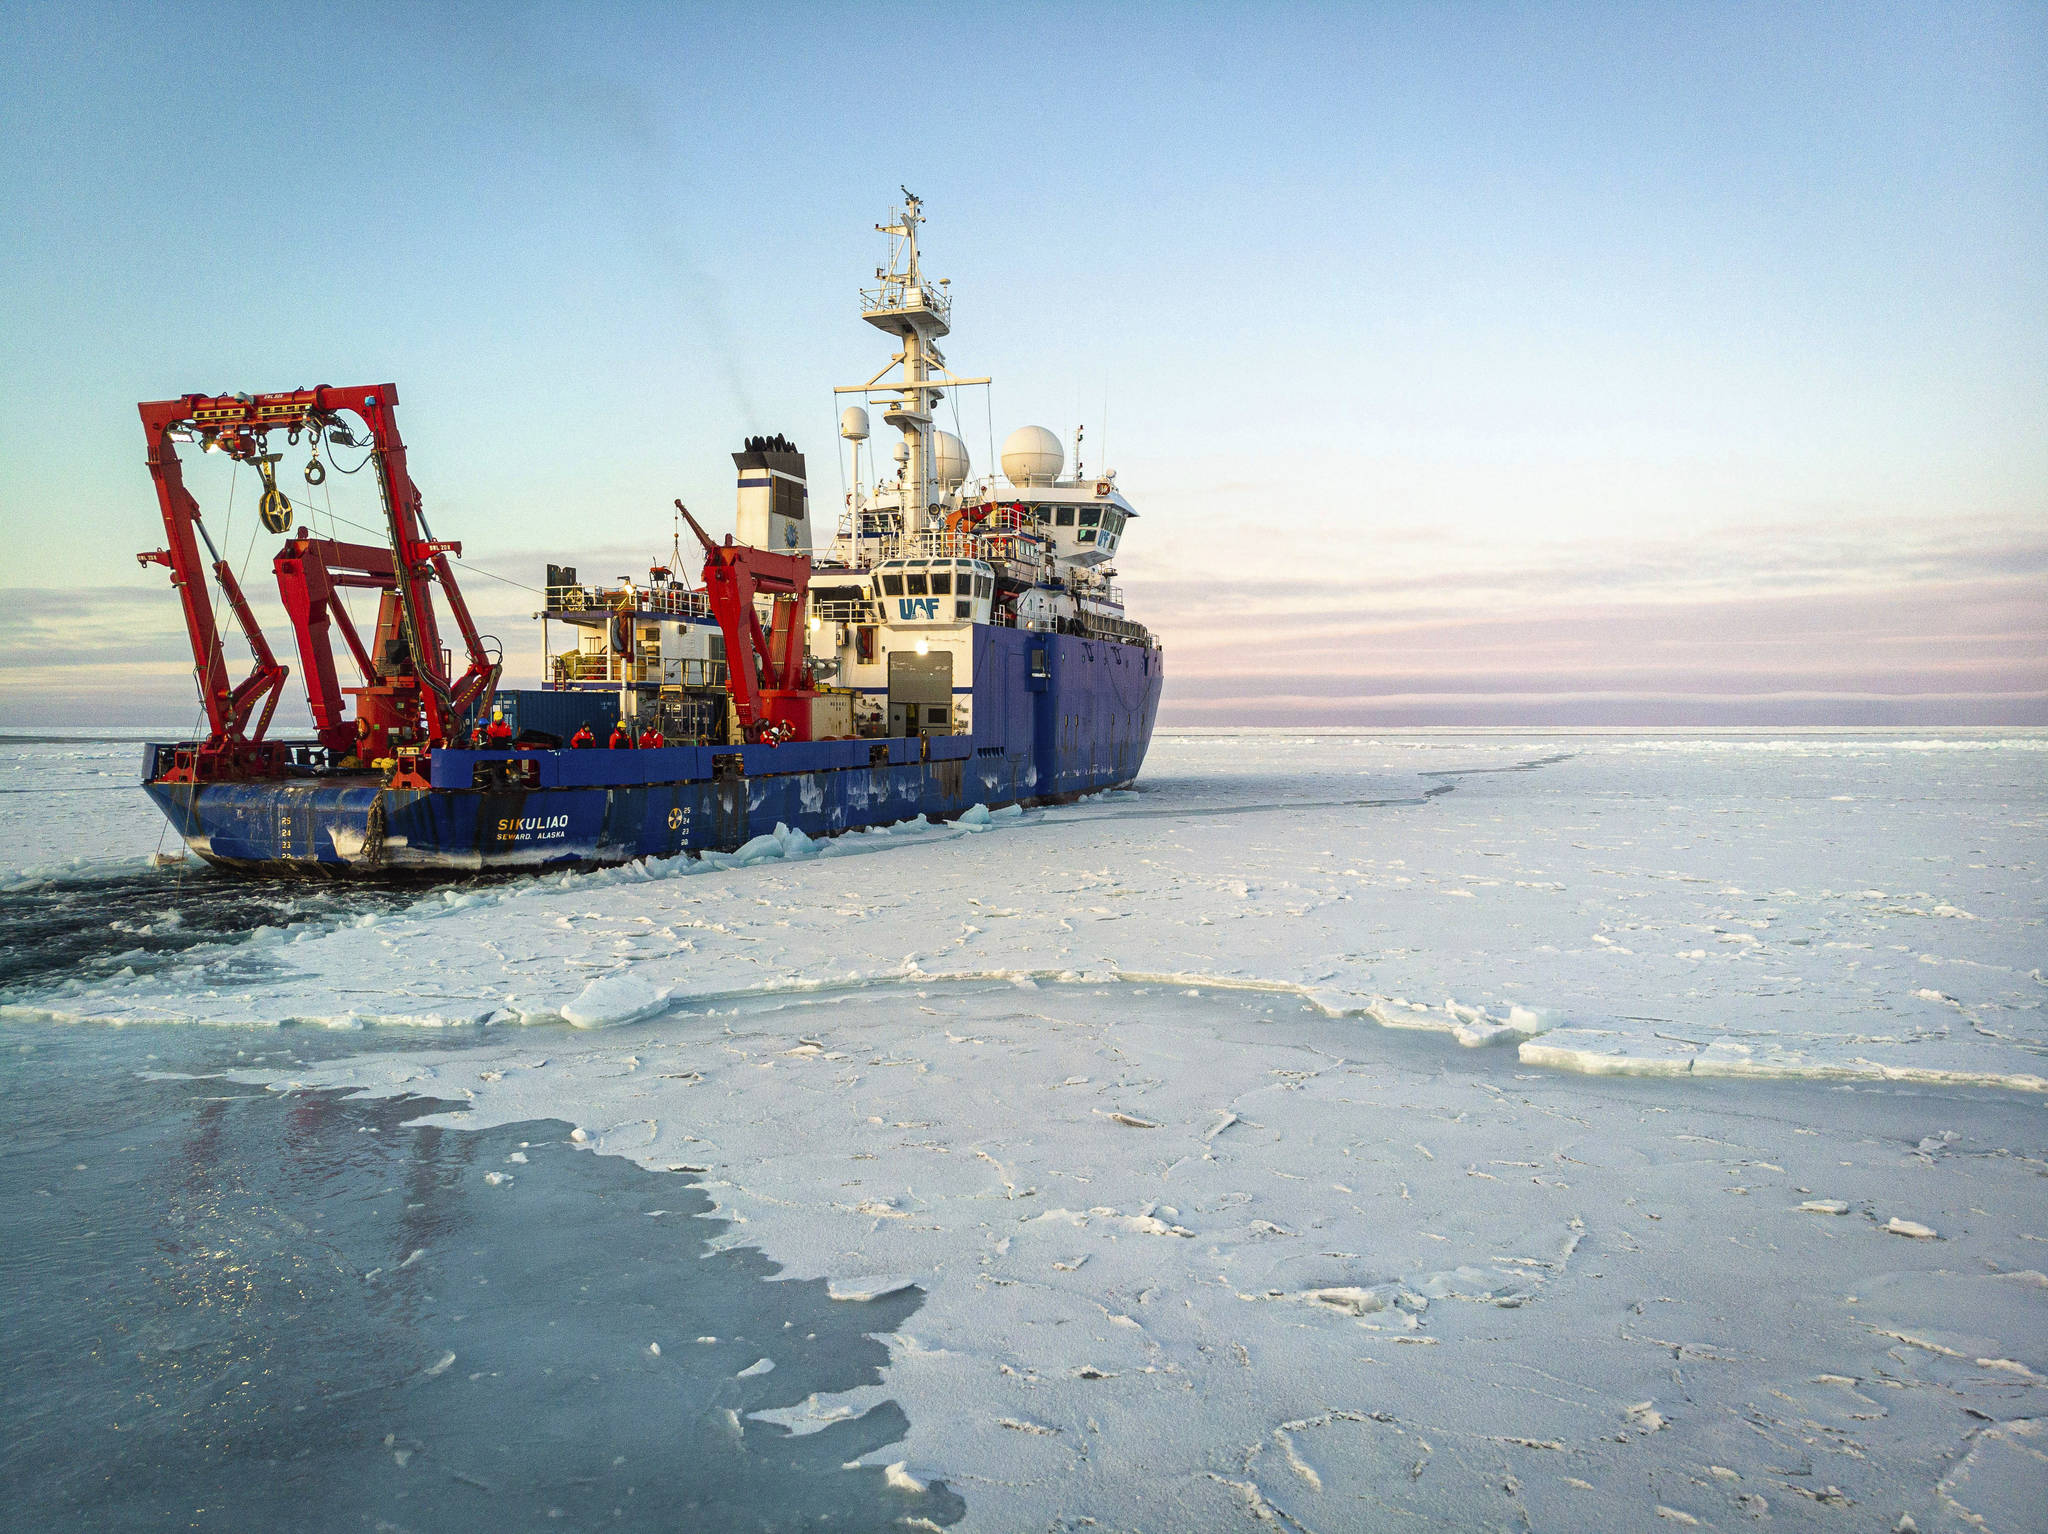 In this Nov. 14, 2019 photo provided by John Guillote and taken from an aerial drone shows the research vessel Sikuliaq as it makes its way through thin sea ice in the Beaufort Sea off Alaska’s north coast. University of Washington scientists onboard the research vessel are studying the changes and how less sea ice will affect coastlines, which already are vulnerable to erosion because increased waves delivered by storms. More erosion would increase the chance of winter flooding in villages and danger to hunters in small boats. (John Guillote via AP)